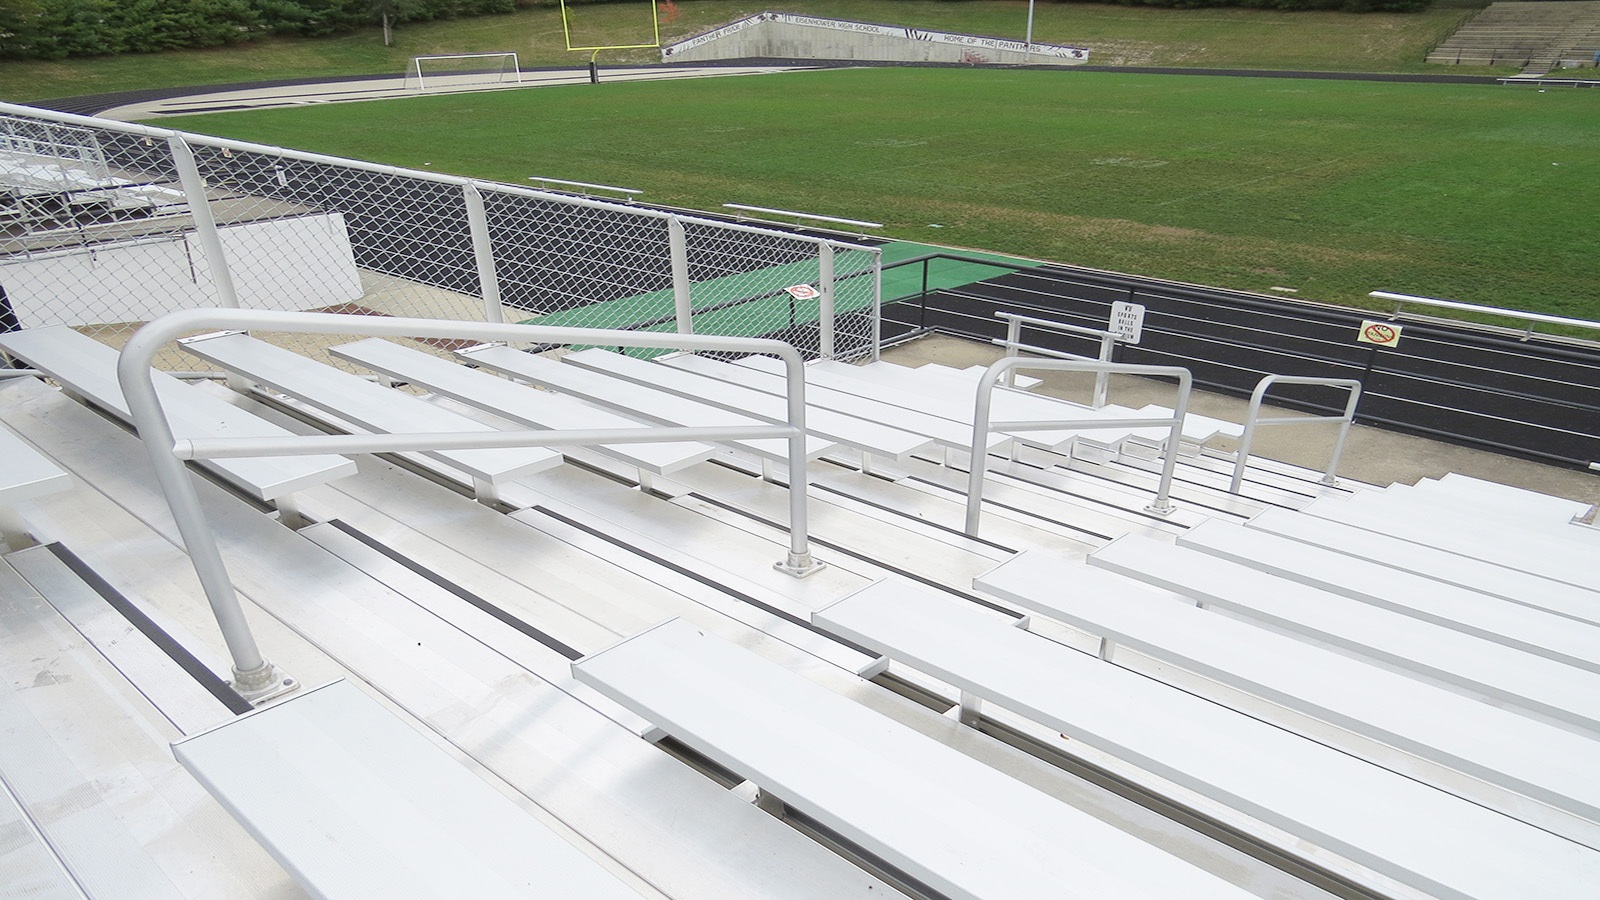 Football bleacher seating in Decatur, IL